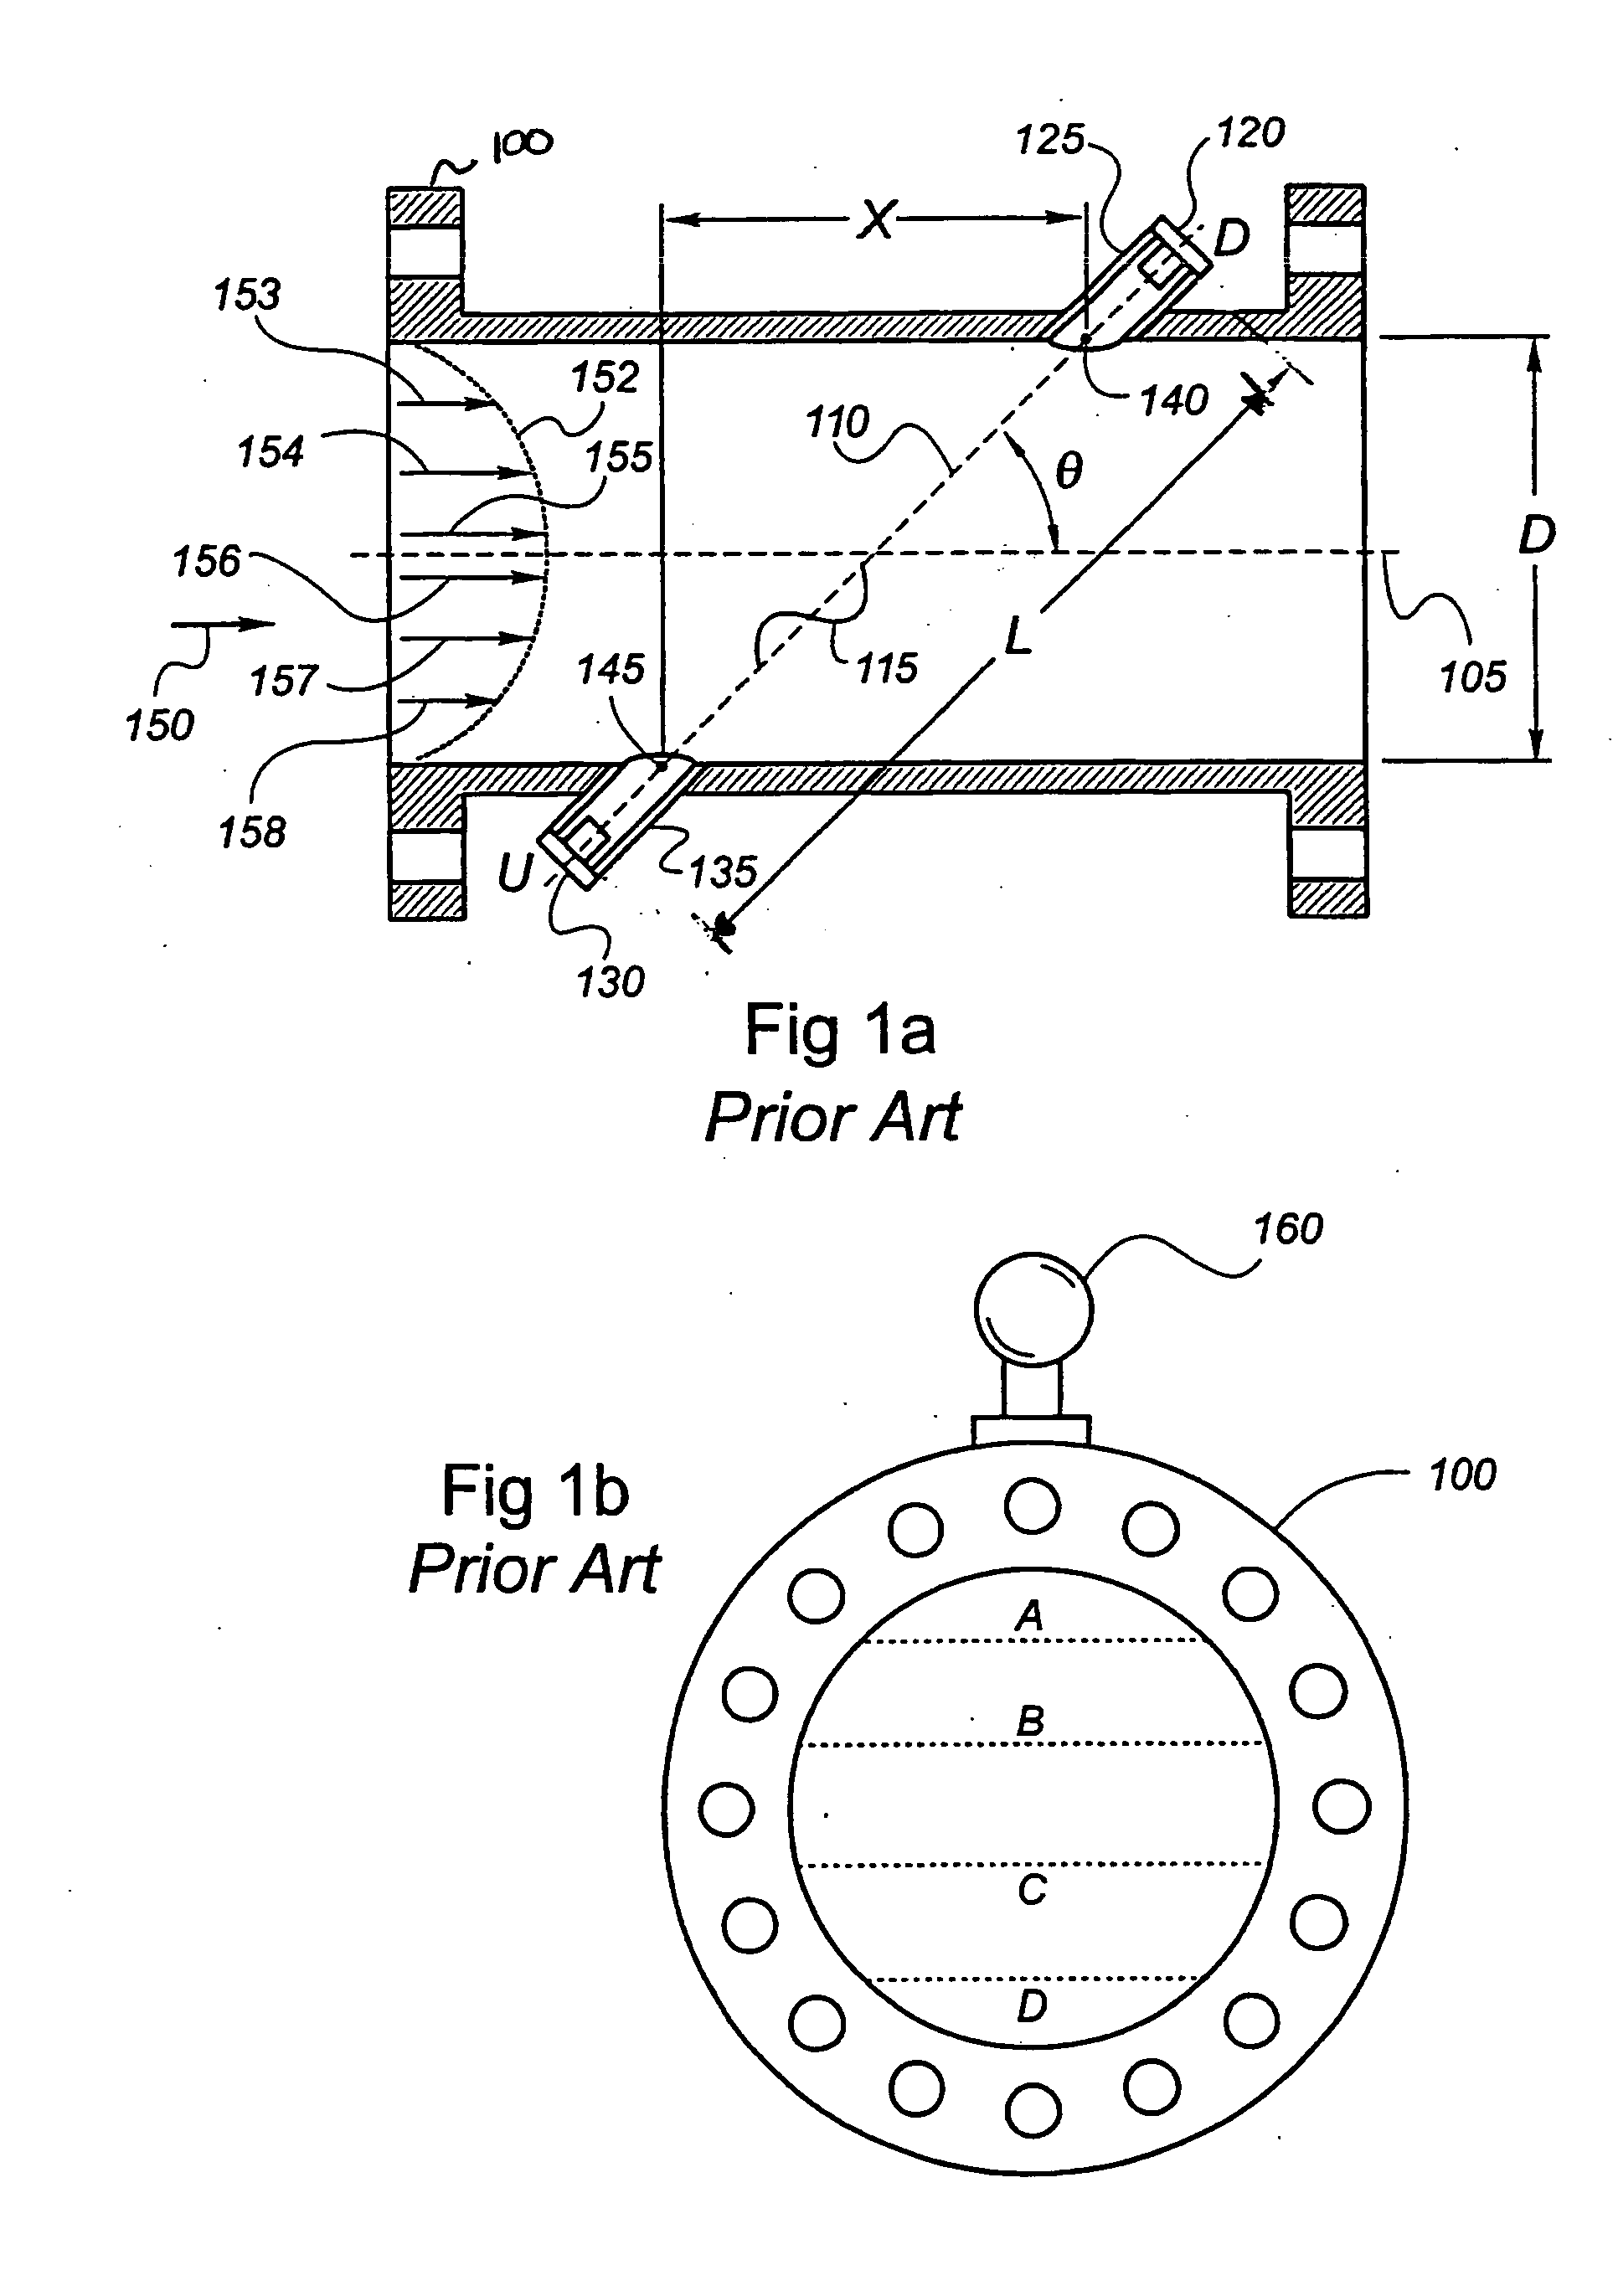 Method to snapshot and playback raw data in an ultrasonic meter